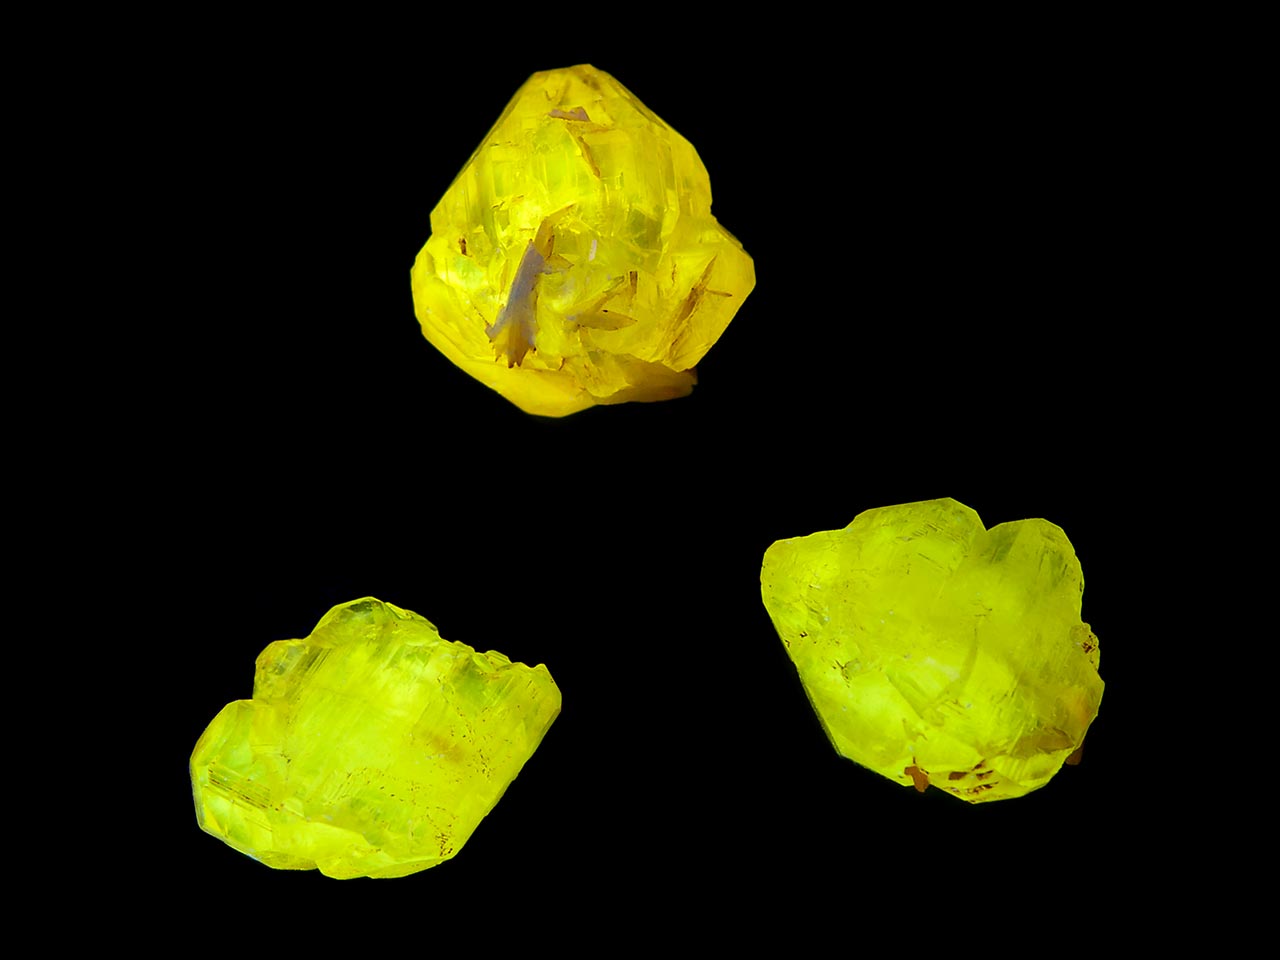 Cerussite crystals from Mibladen, Morocco showing bright yellow fluorescence in shortwave UV light